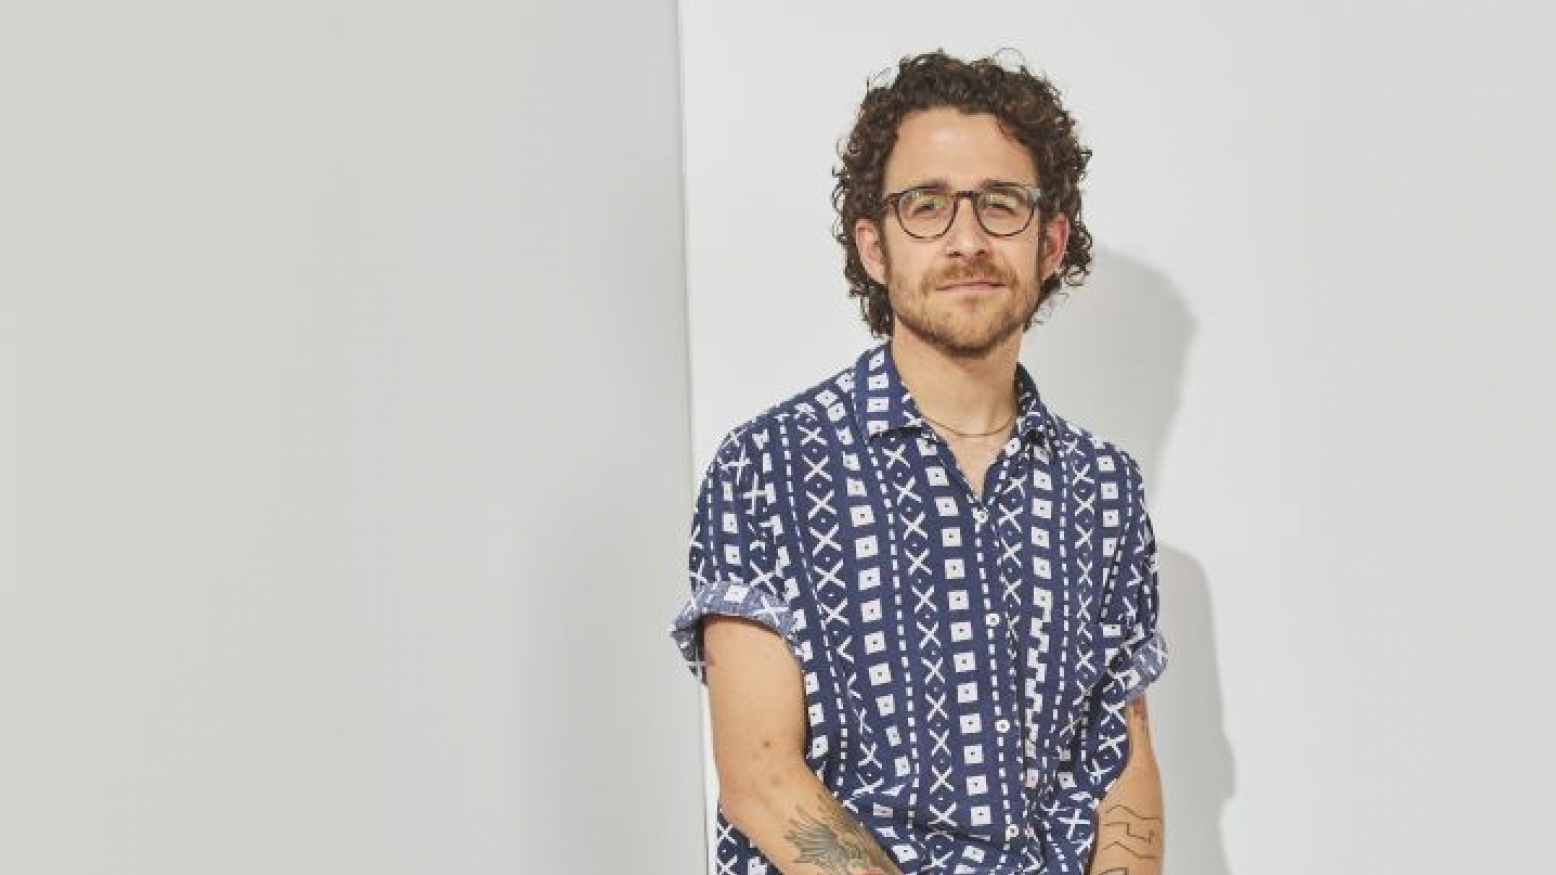 An image of Mickey Davis, a white man with short, curly brown hair wearing glasses. He is in front of a white wall and is wearing a short sleeved button-down shirt with a blue and white geometric pattern. 